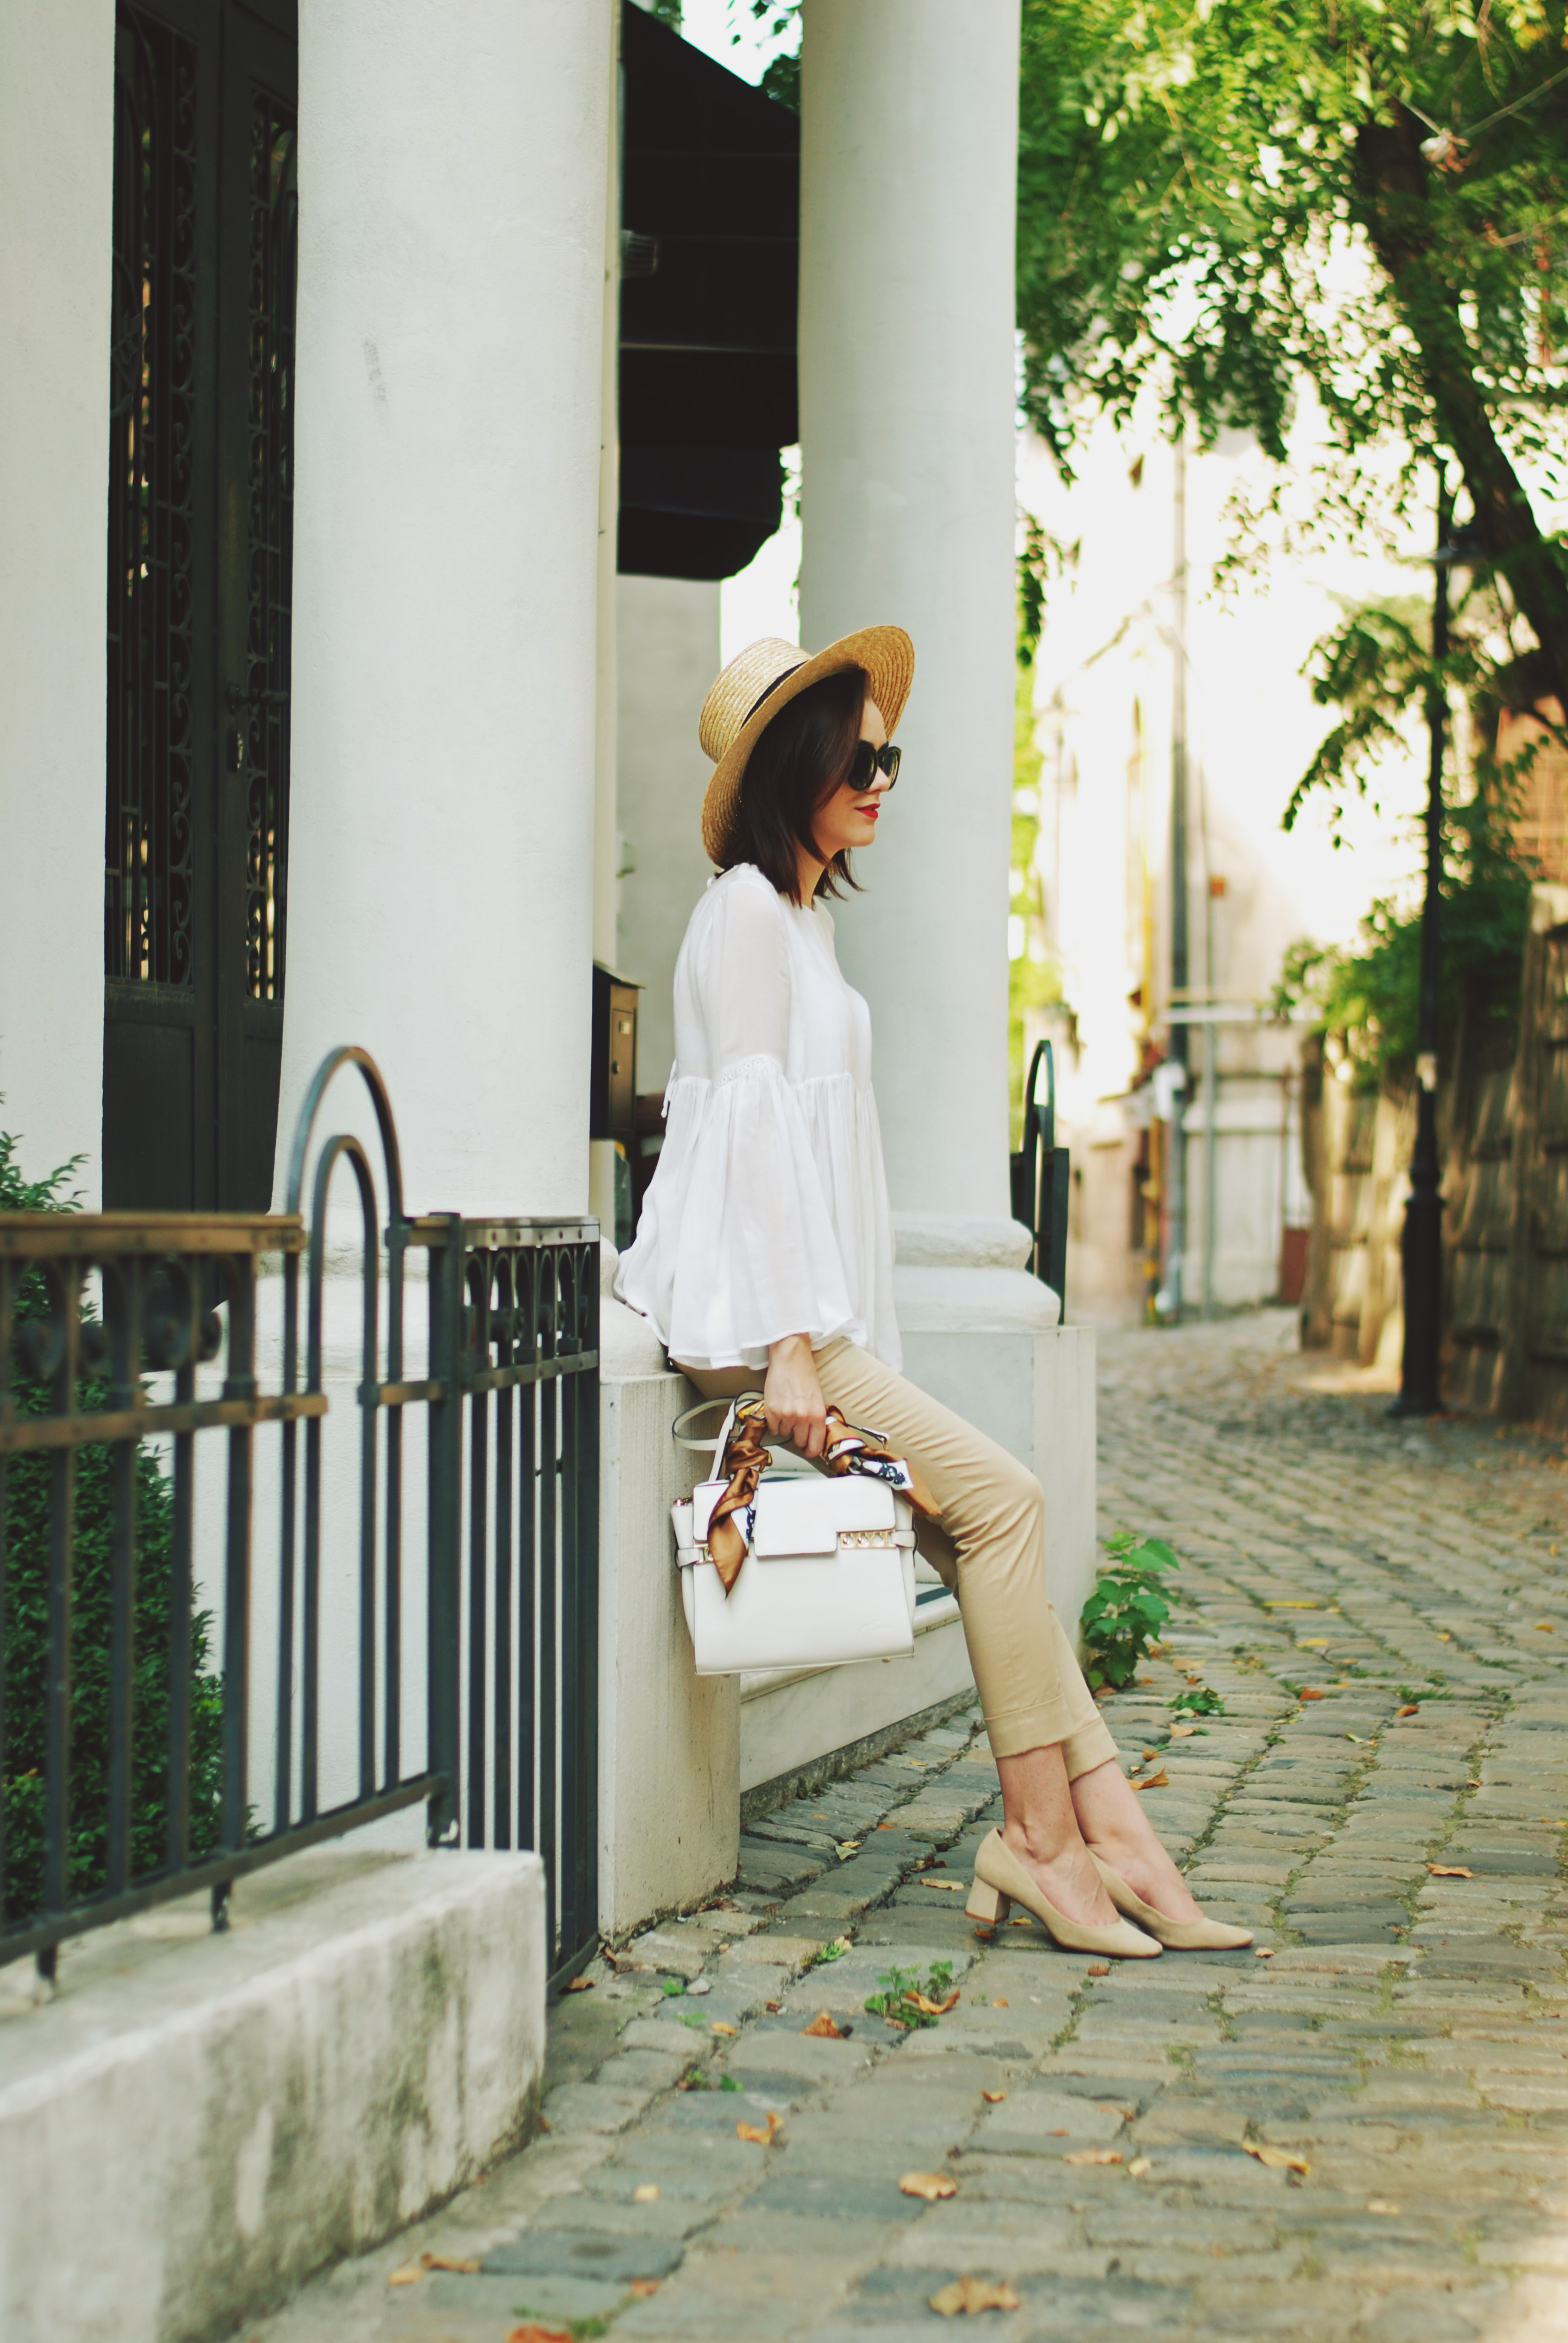 Camel pants trousers, white bell sleeve top, beige suede pumps, straw hat, white crossbody bag, scarf, summer fall outfit idea, Andreea Birsan